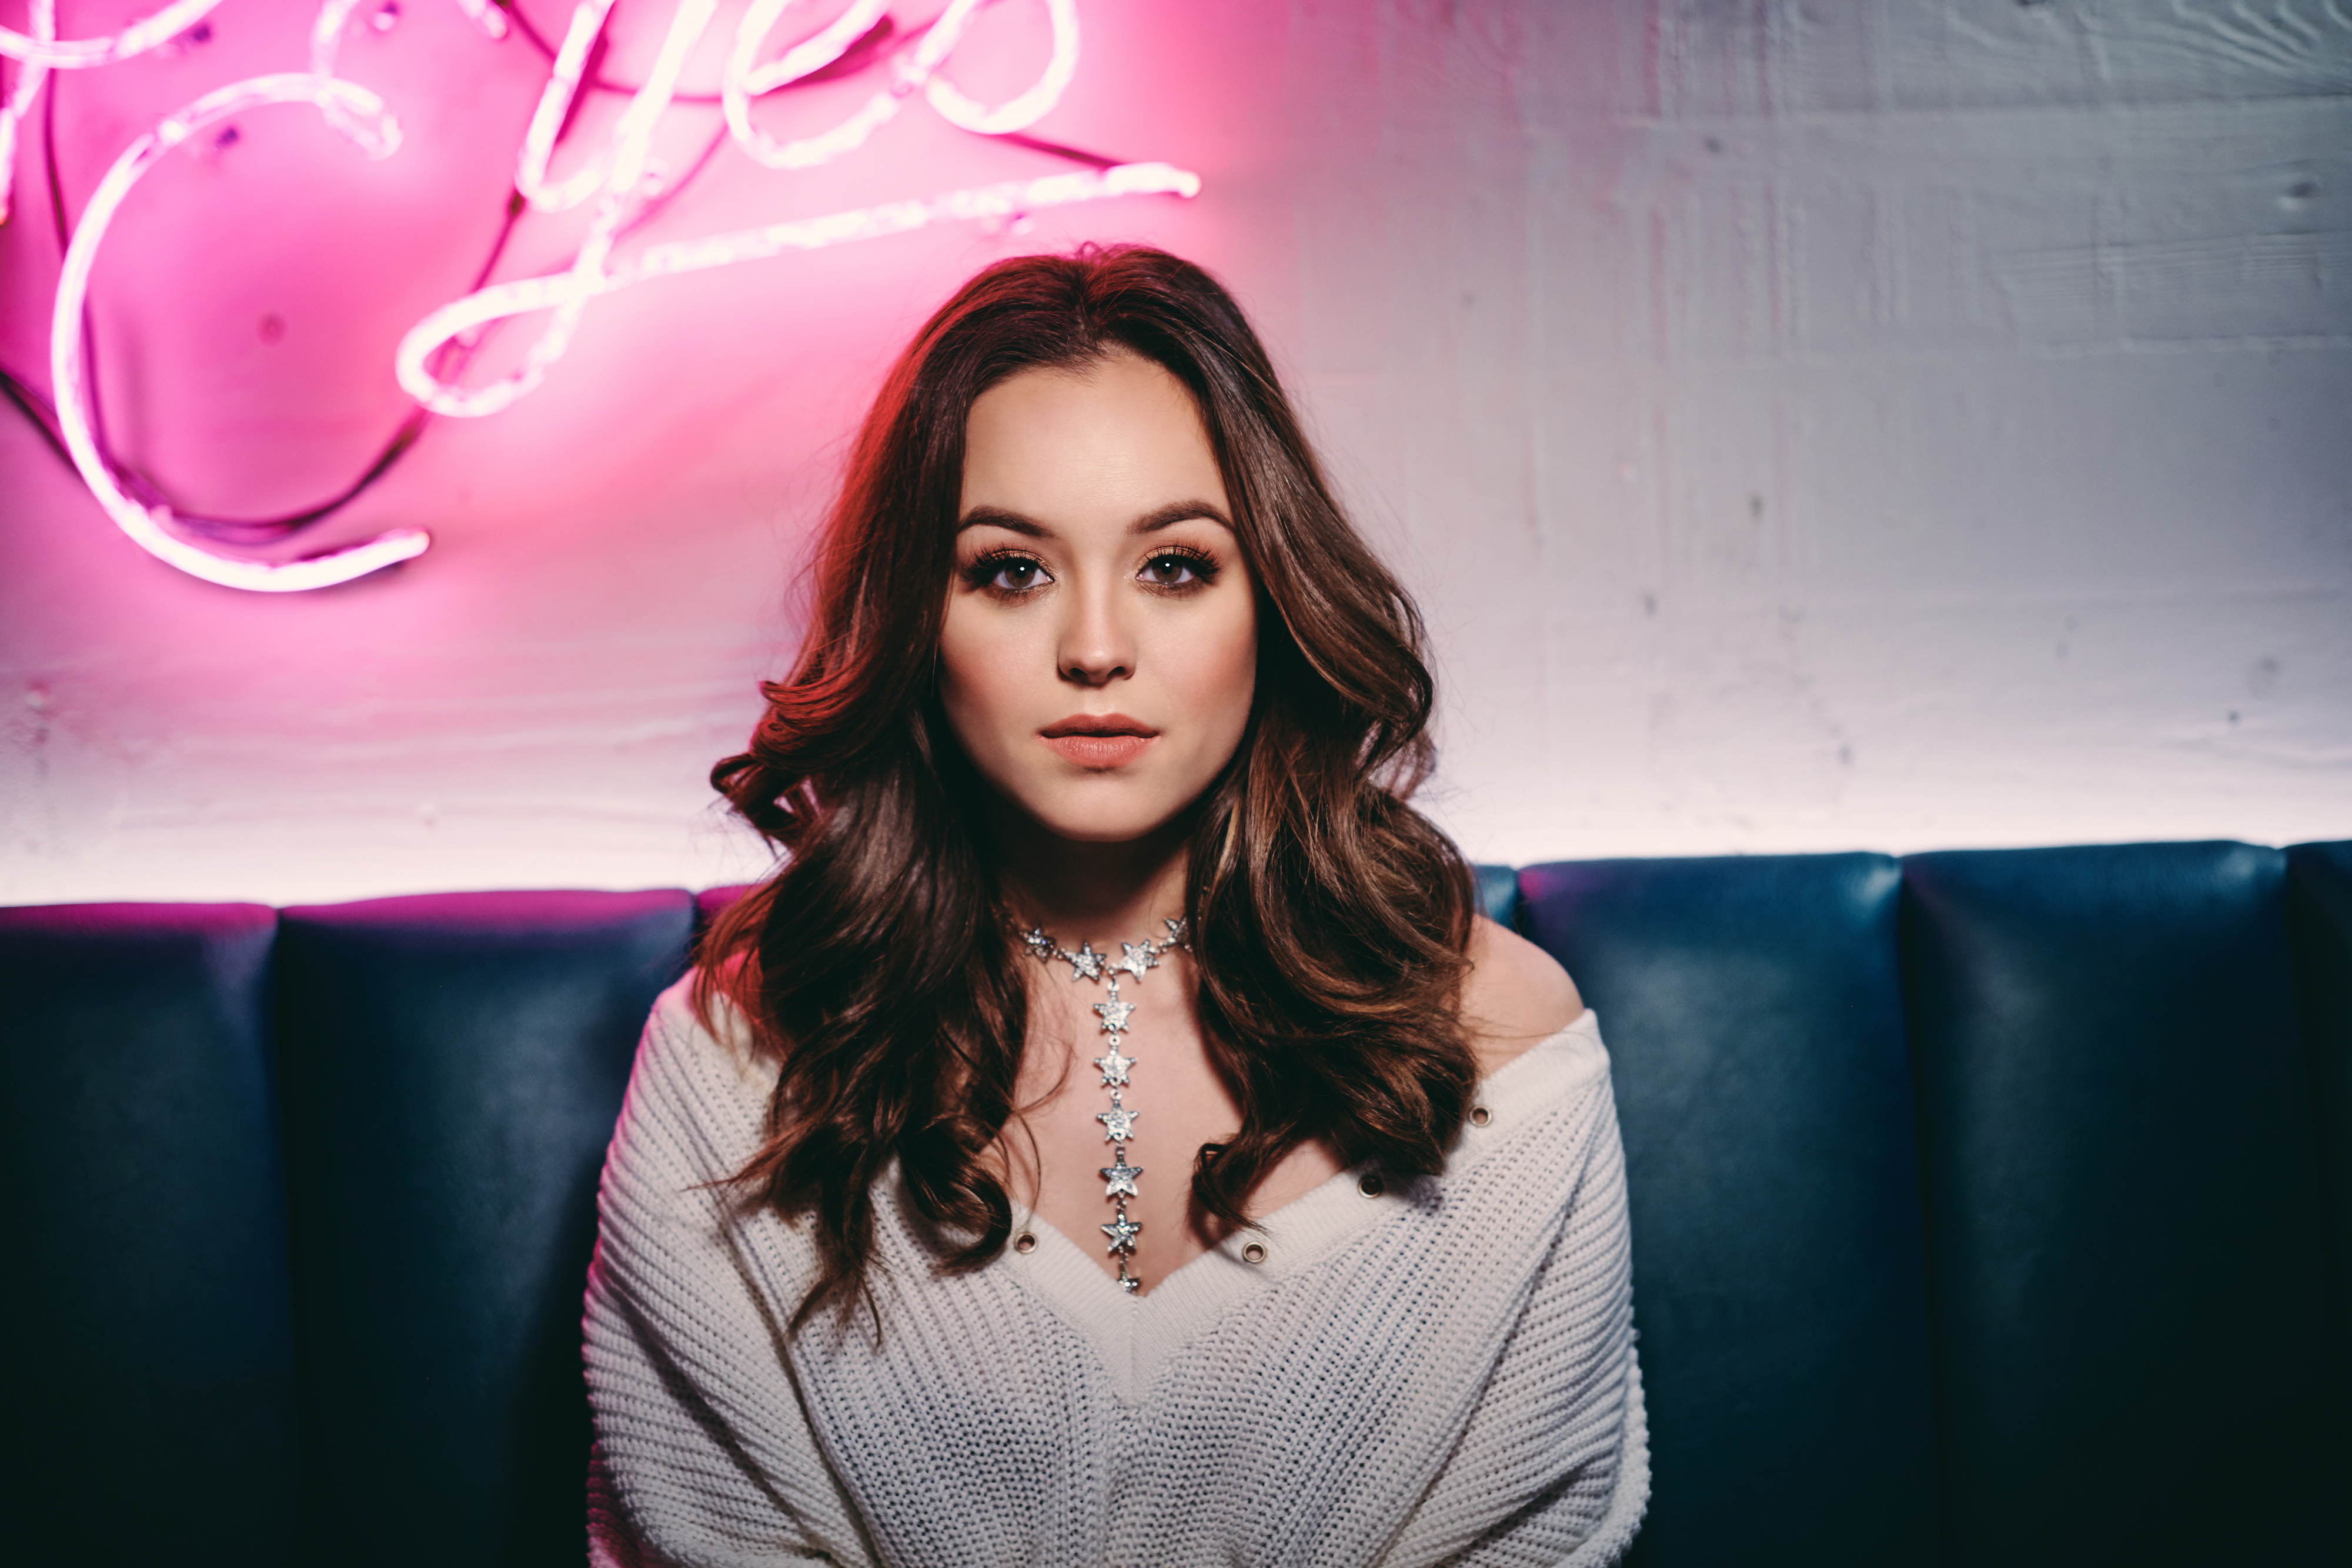 Hayley Orrantia Shares Her Favorite Song Off New EP “The Way Out”